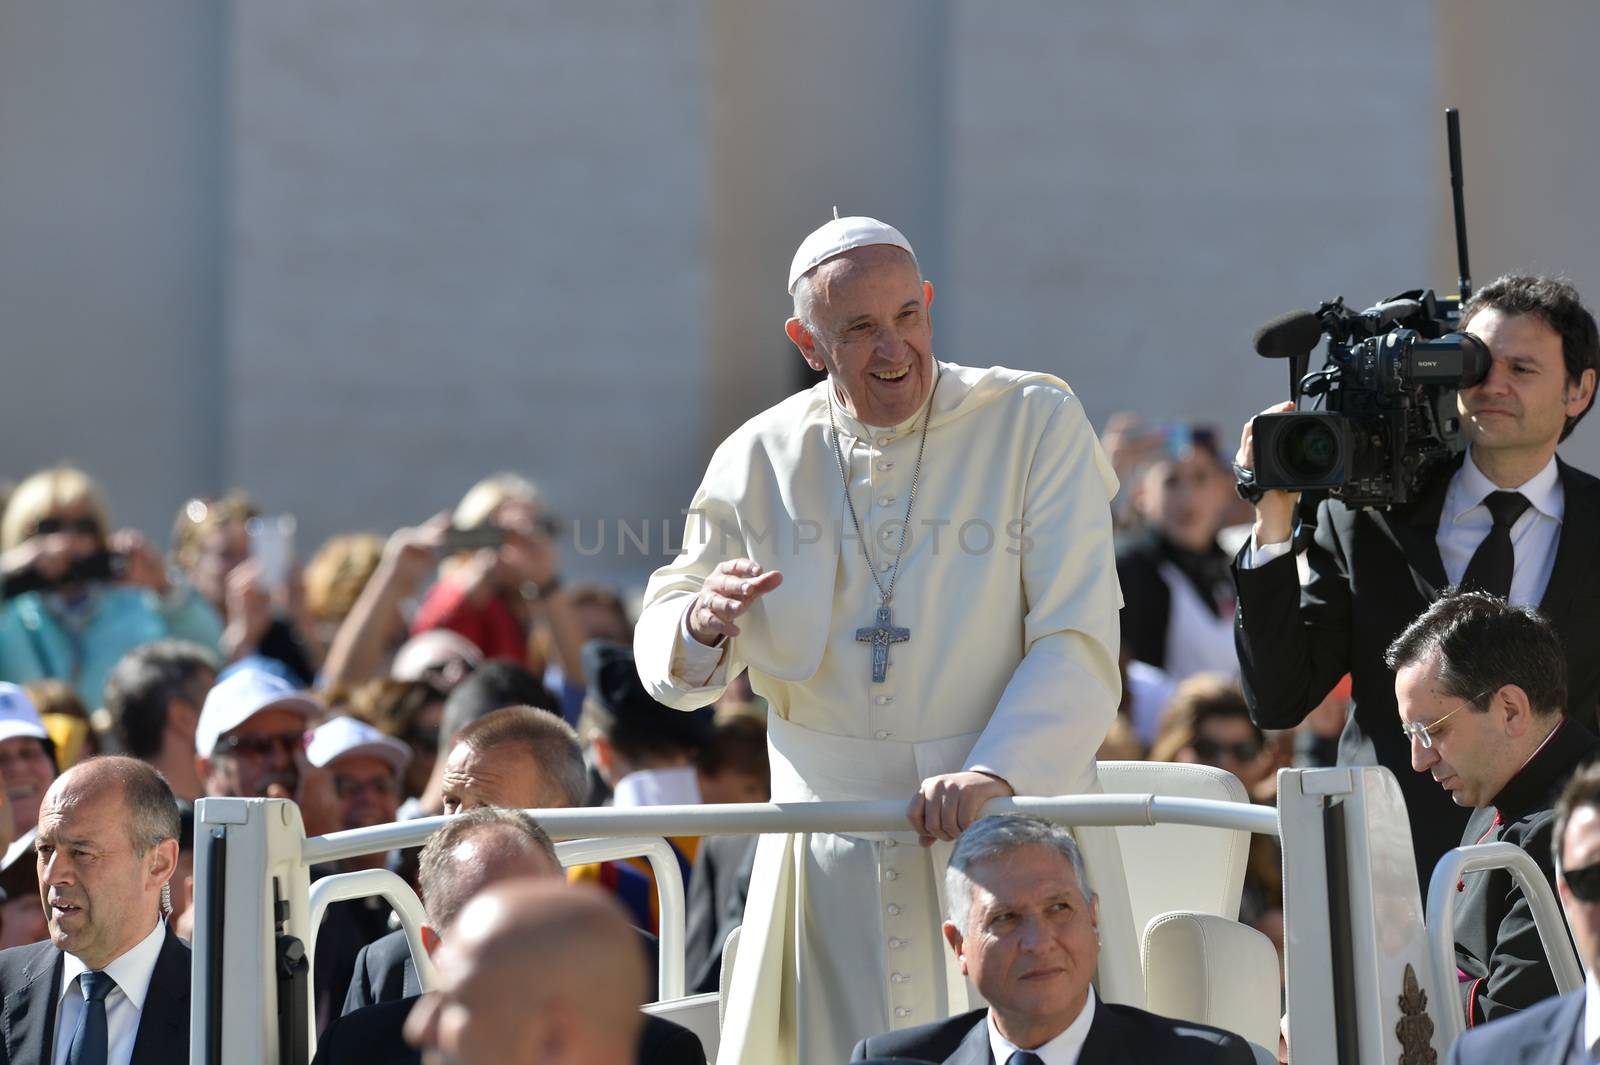 VATICAN: Pope Francis greets the crowd during his weekly general audience at St Peter's square on April 20, 2016 in Vatican. 